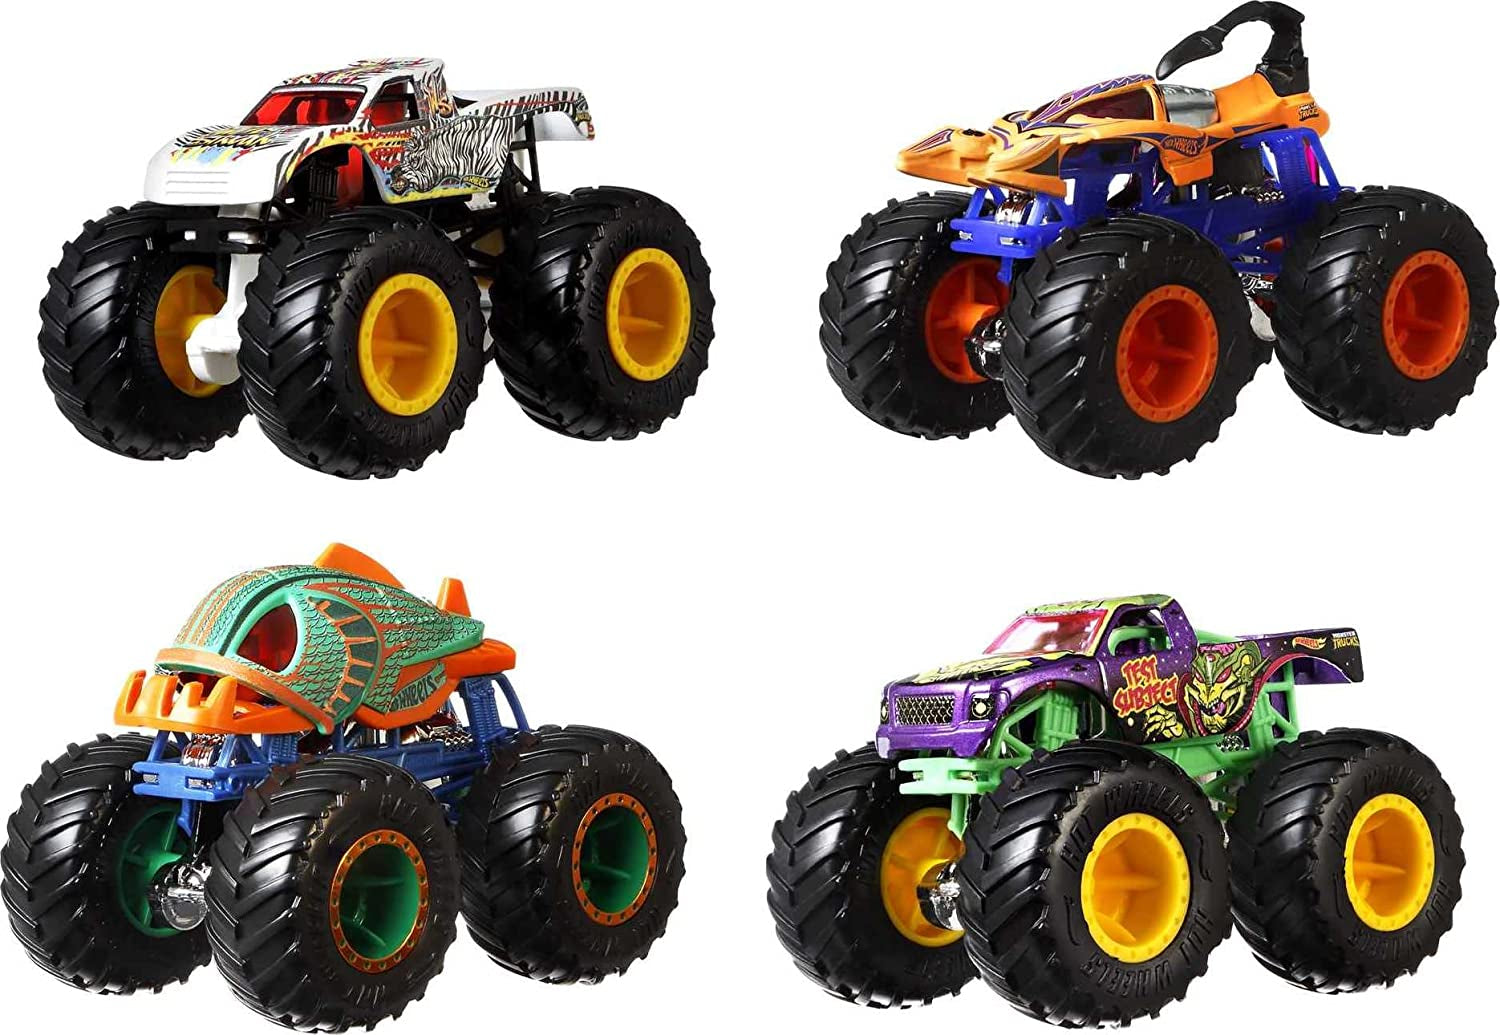 ​Hot Wheels Monster Trucks 1:64 Scale 4-Pack with Giant Wheels Gift Idea for Kids 3 to 6 Years Old [Sytles May Vary]